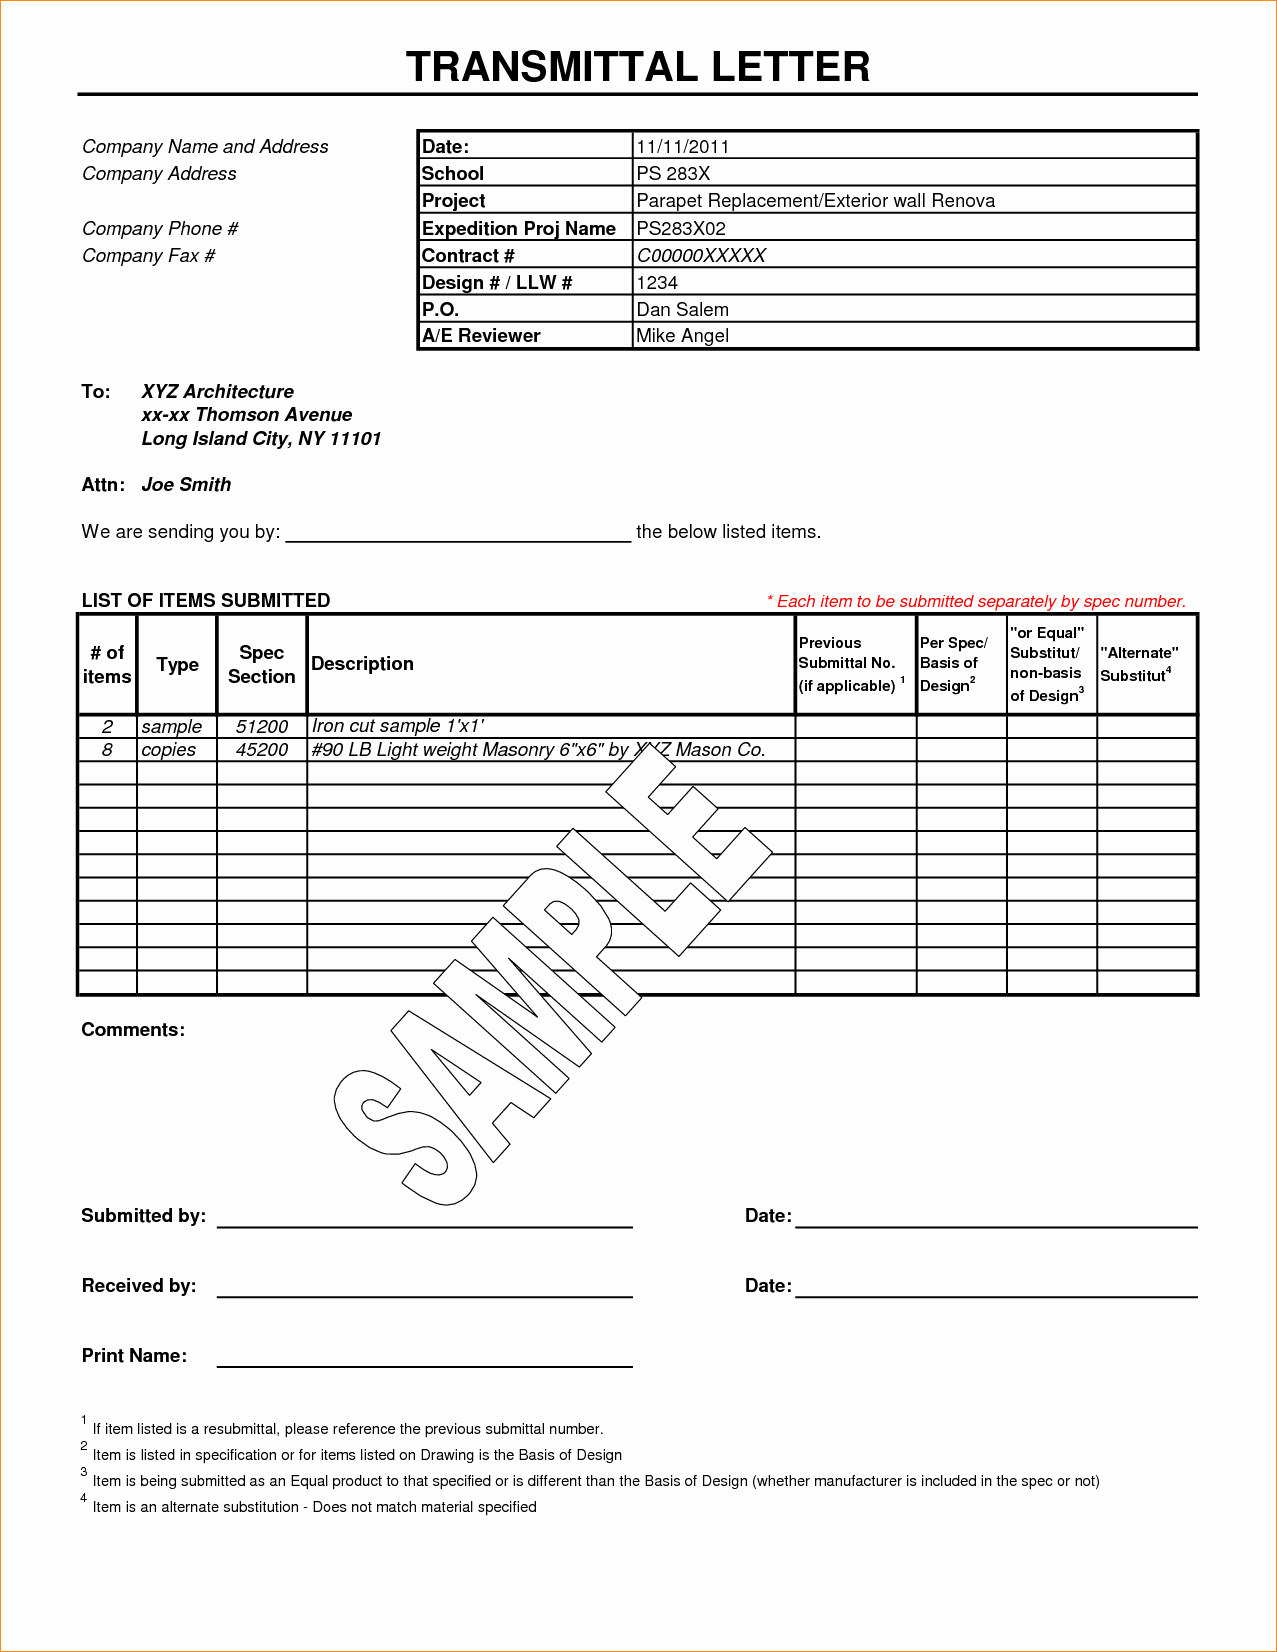 Construction Transmittal Template Awesome 23 Of Transmittal Sheet Template